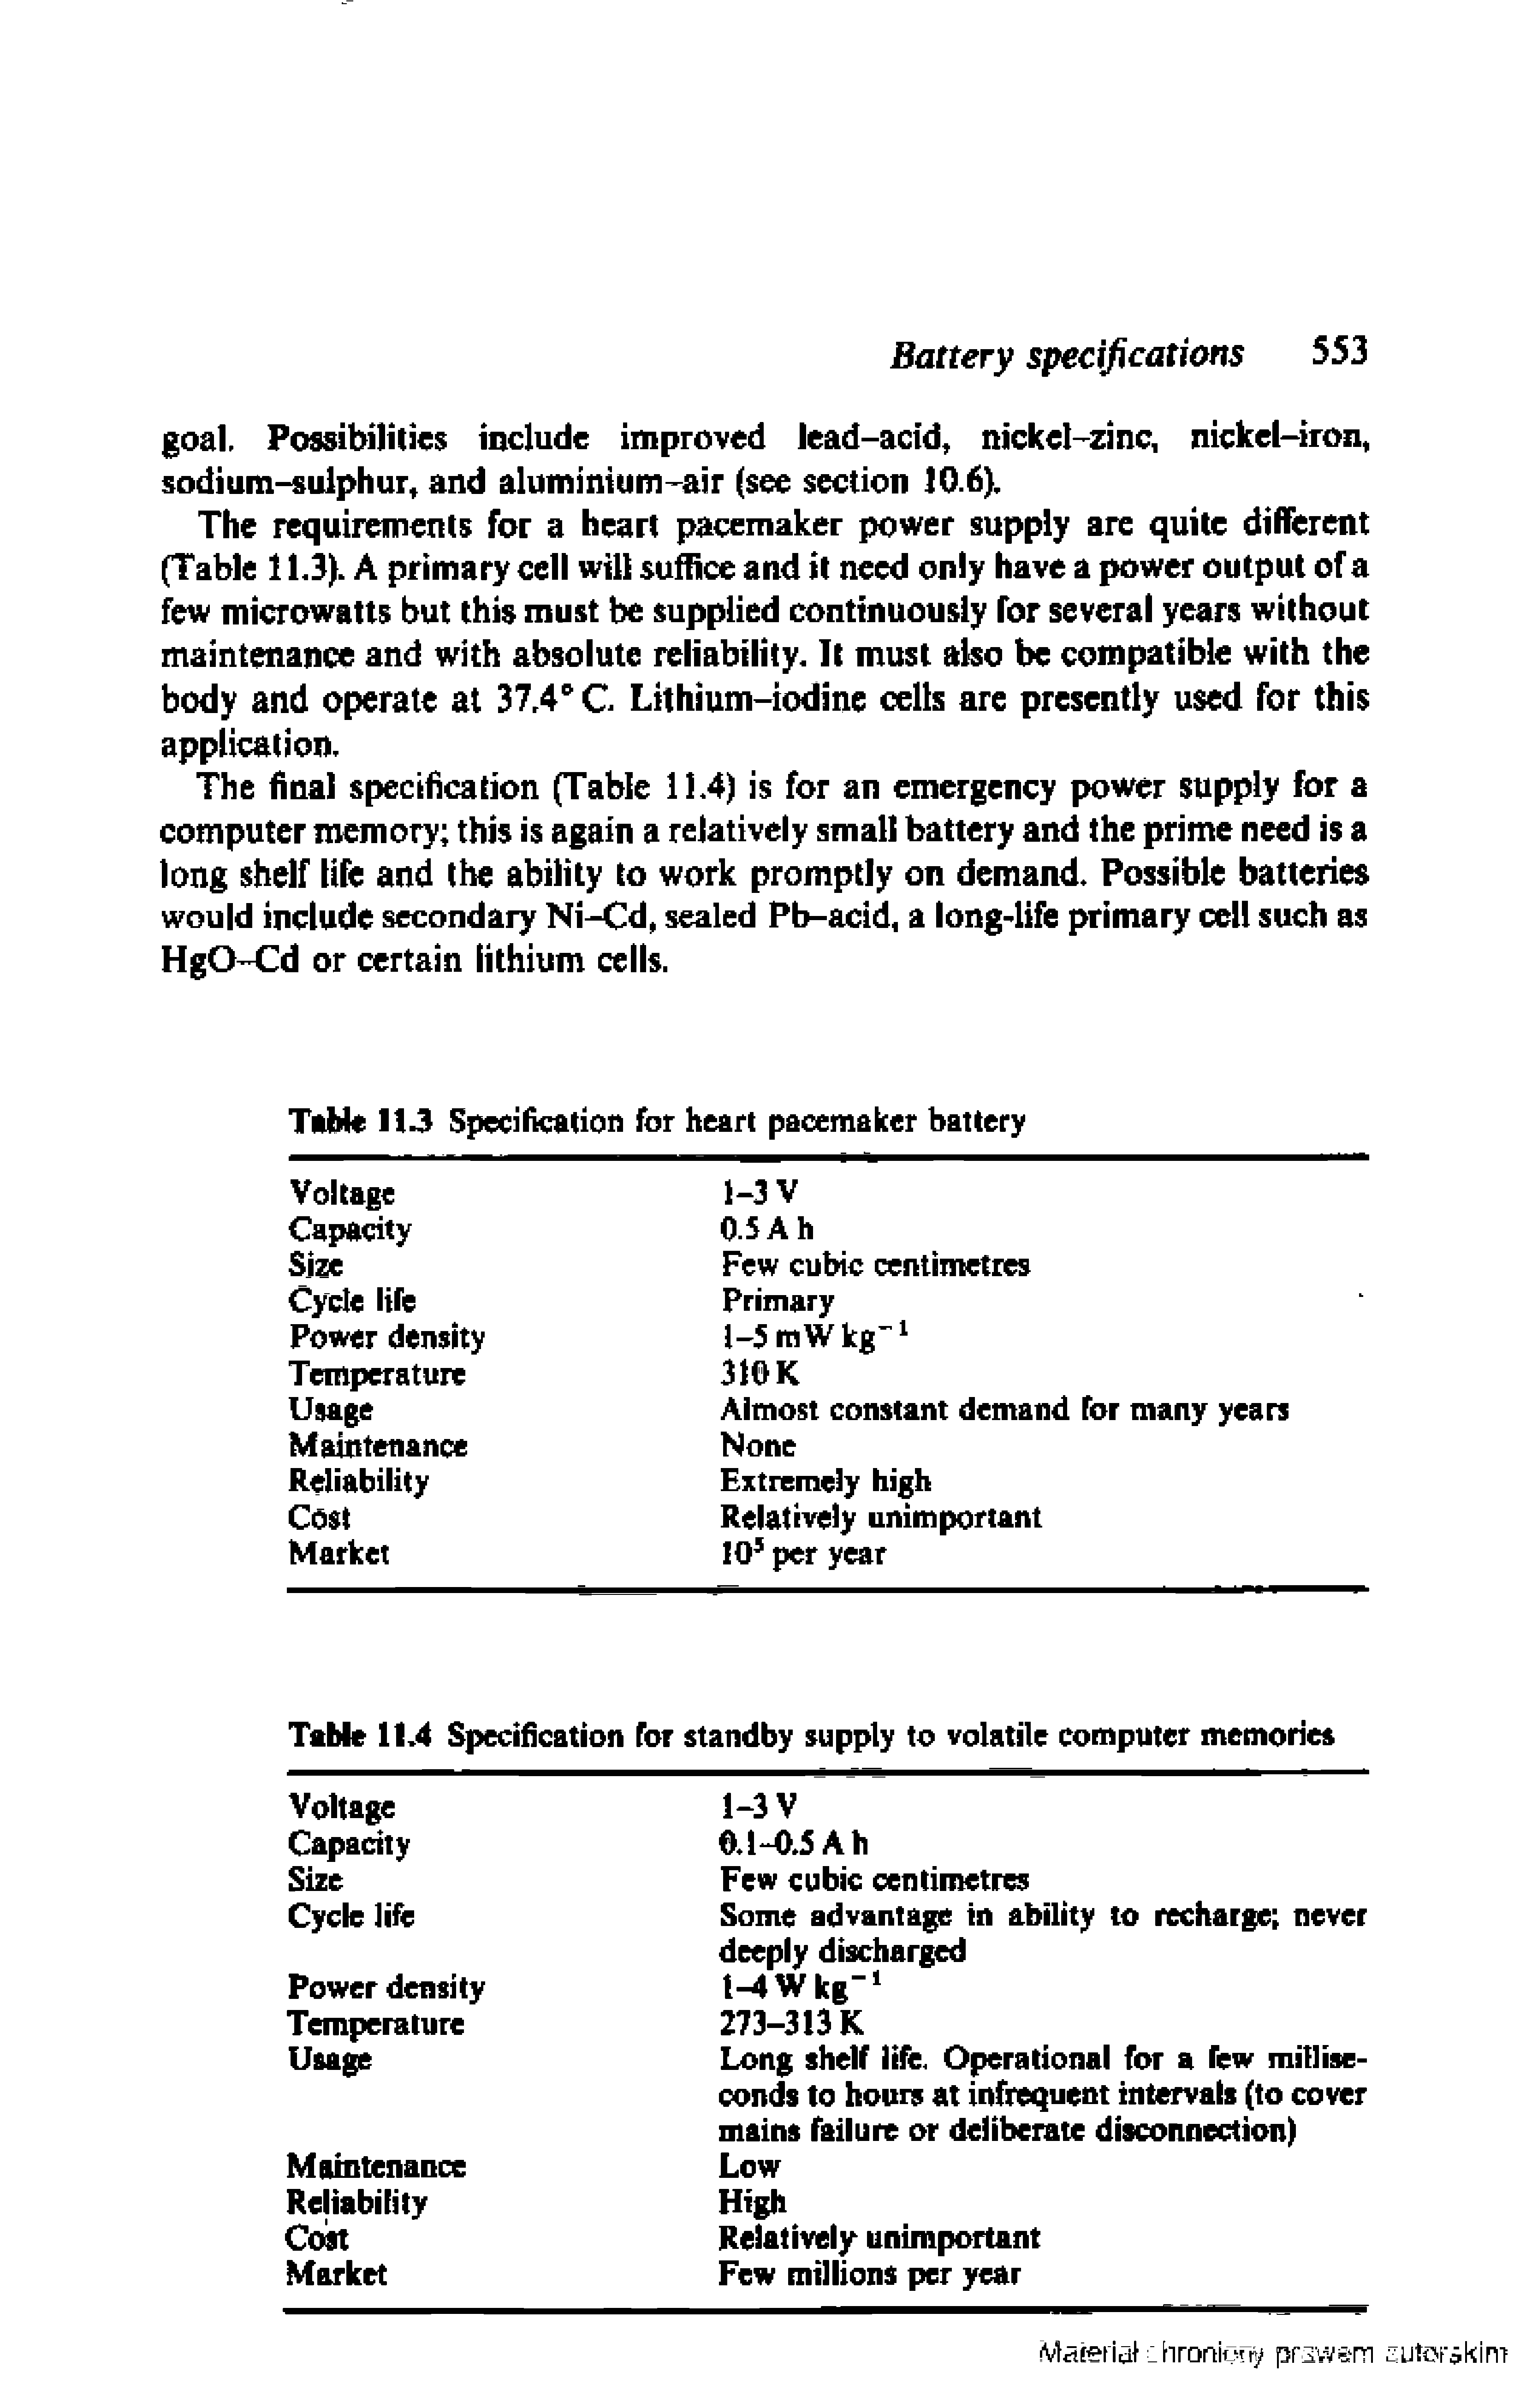 Table 1L4 Specification for standby supply to volatile computer memories...